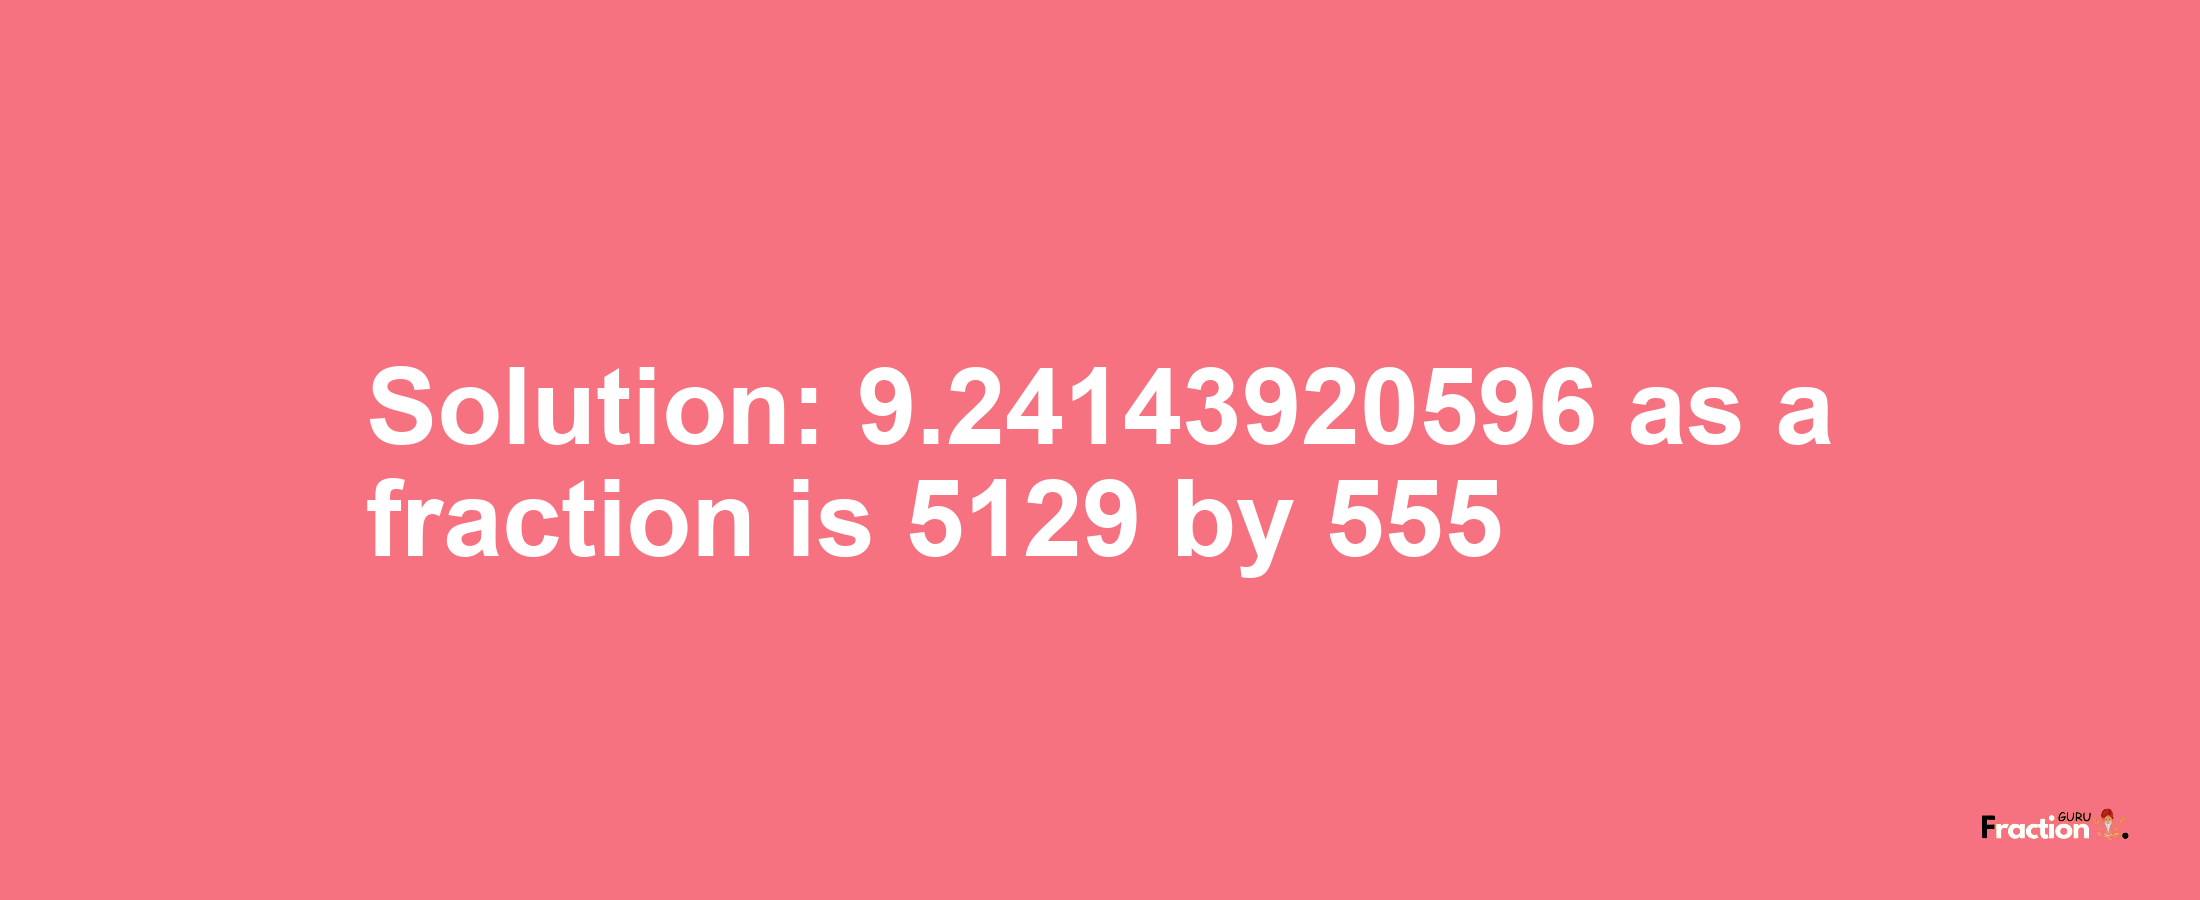 Solution:9.24143920596 as a fraction is 5129/555